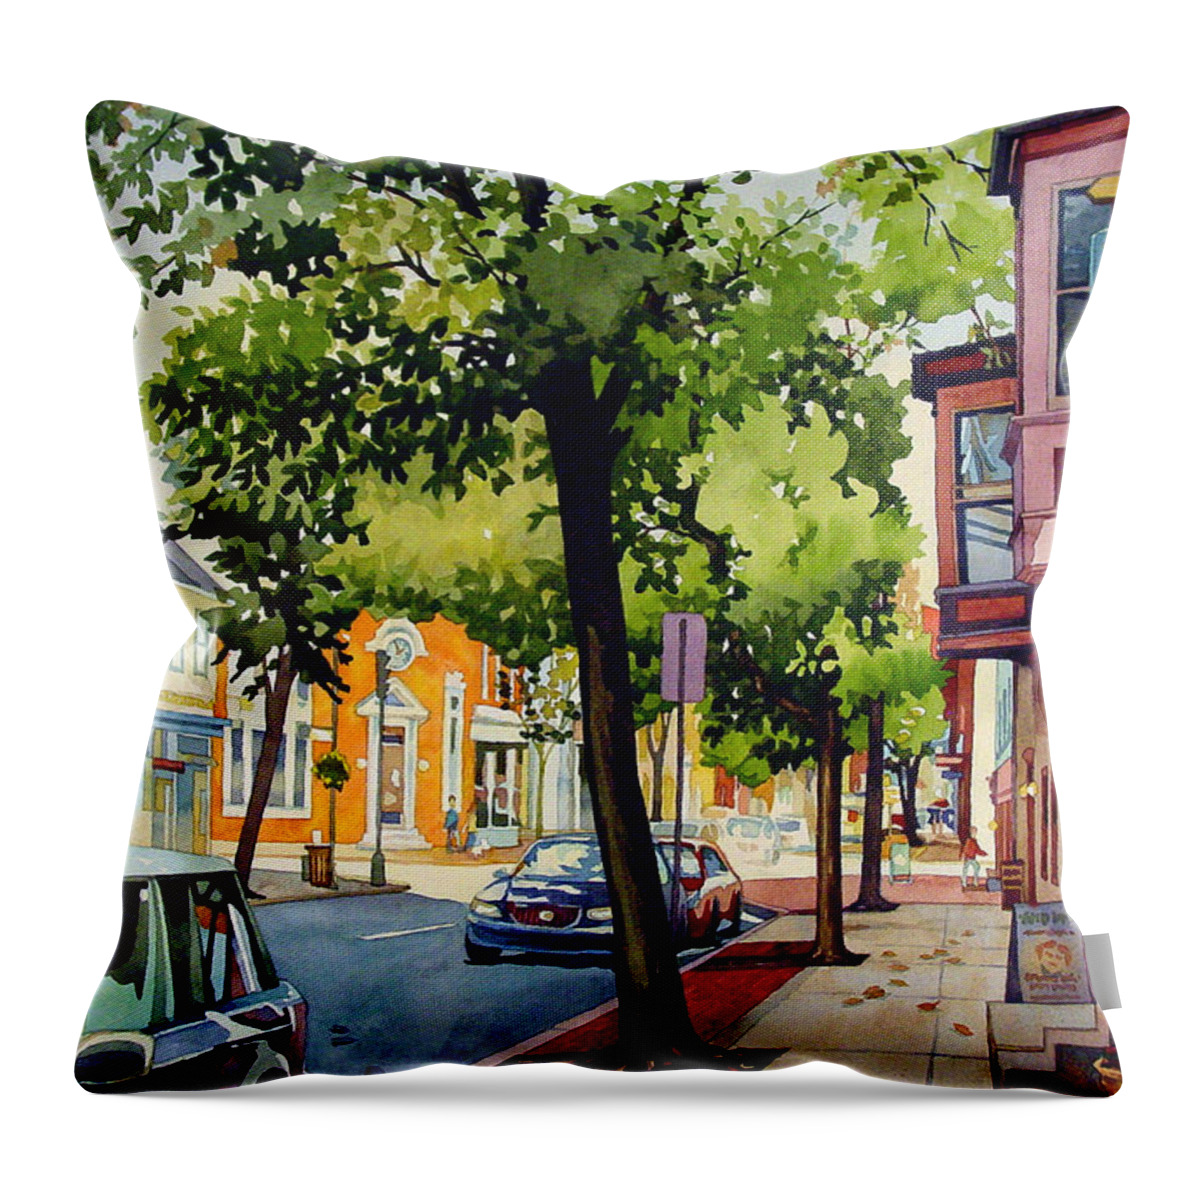 Landscape Throw Pillow featuring the painting Olde Towne by Mick Williams